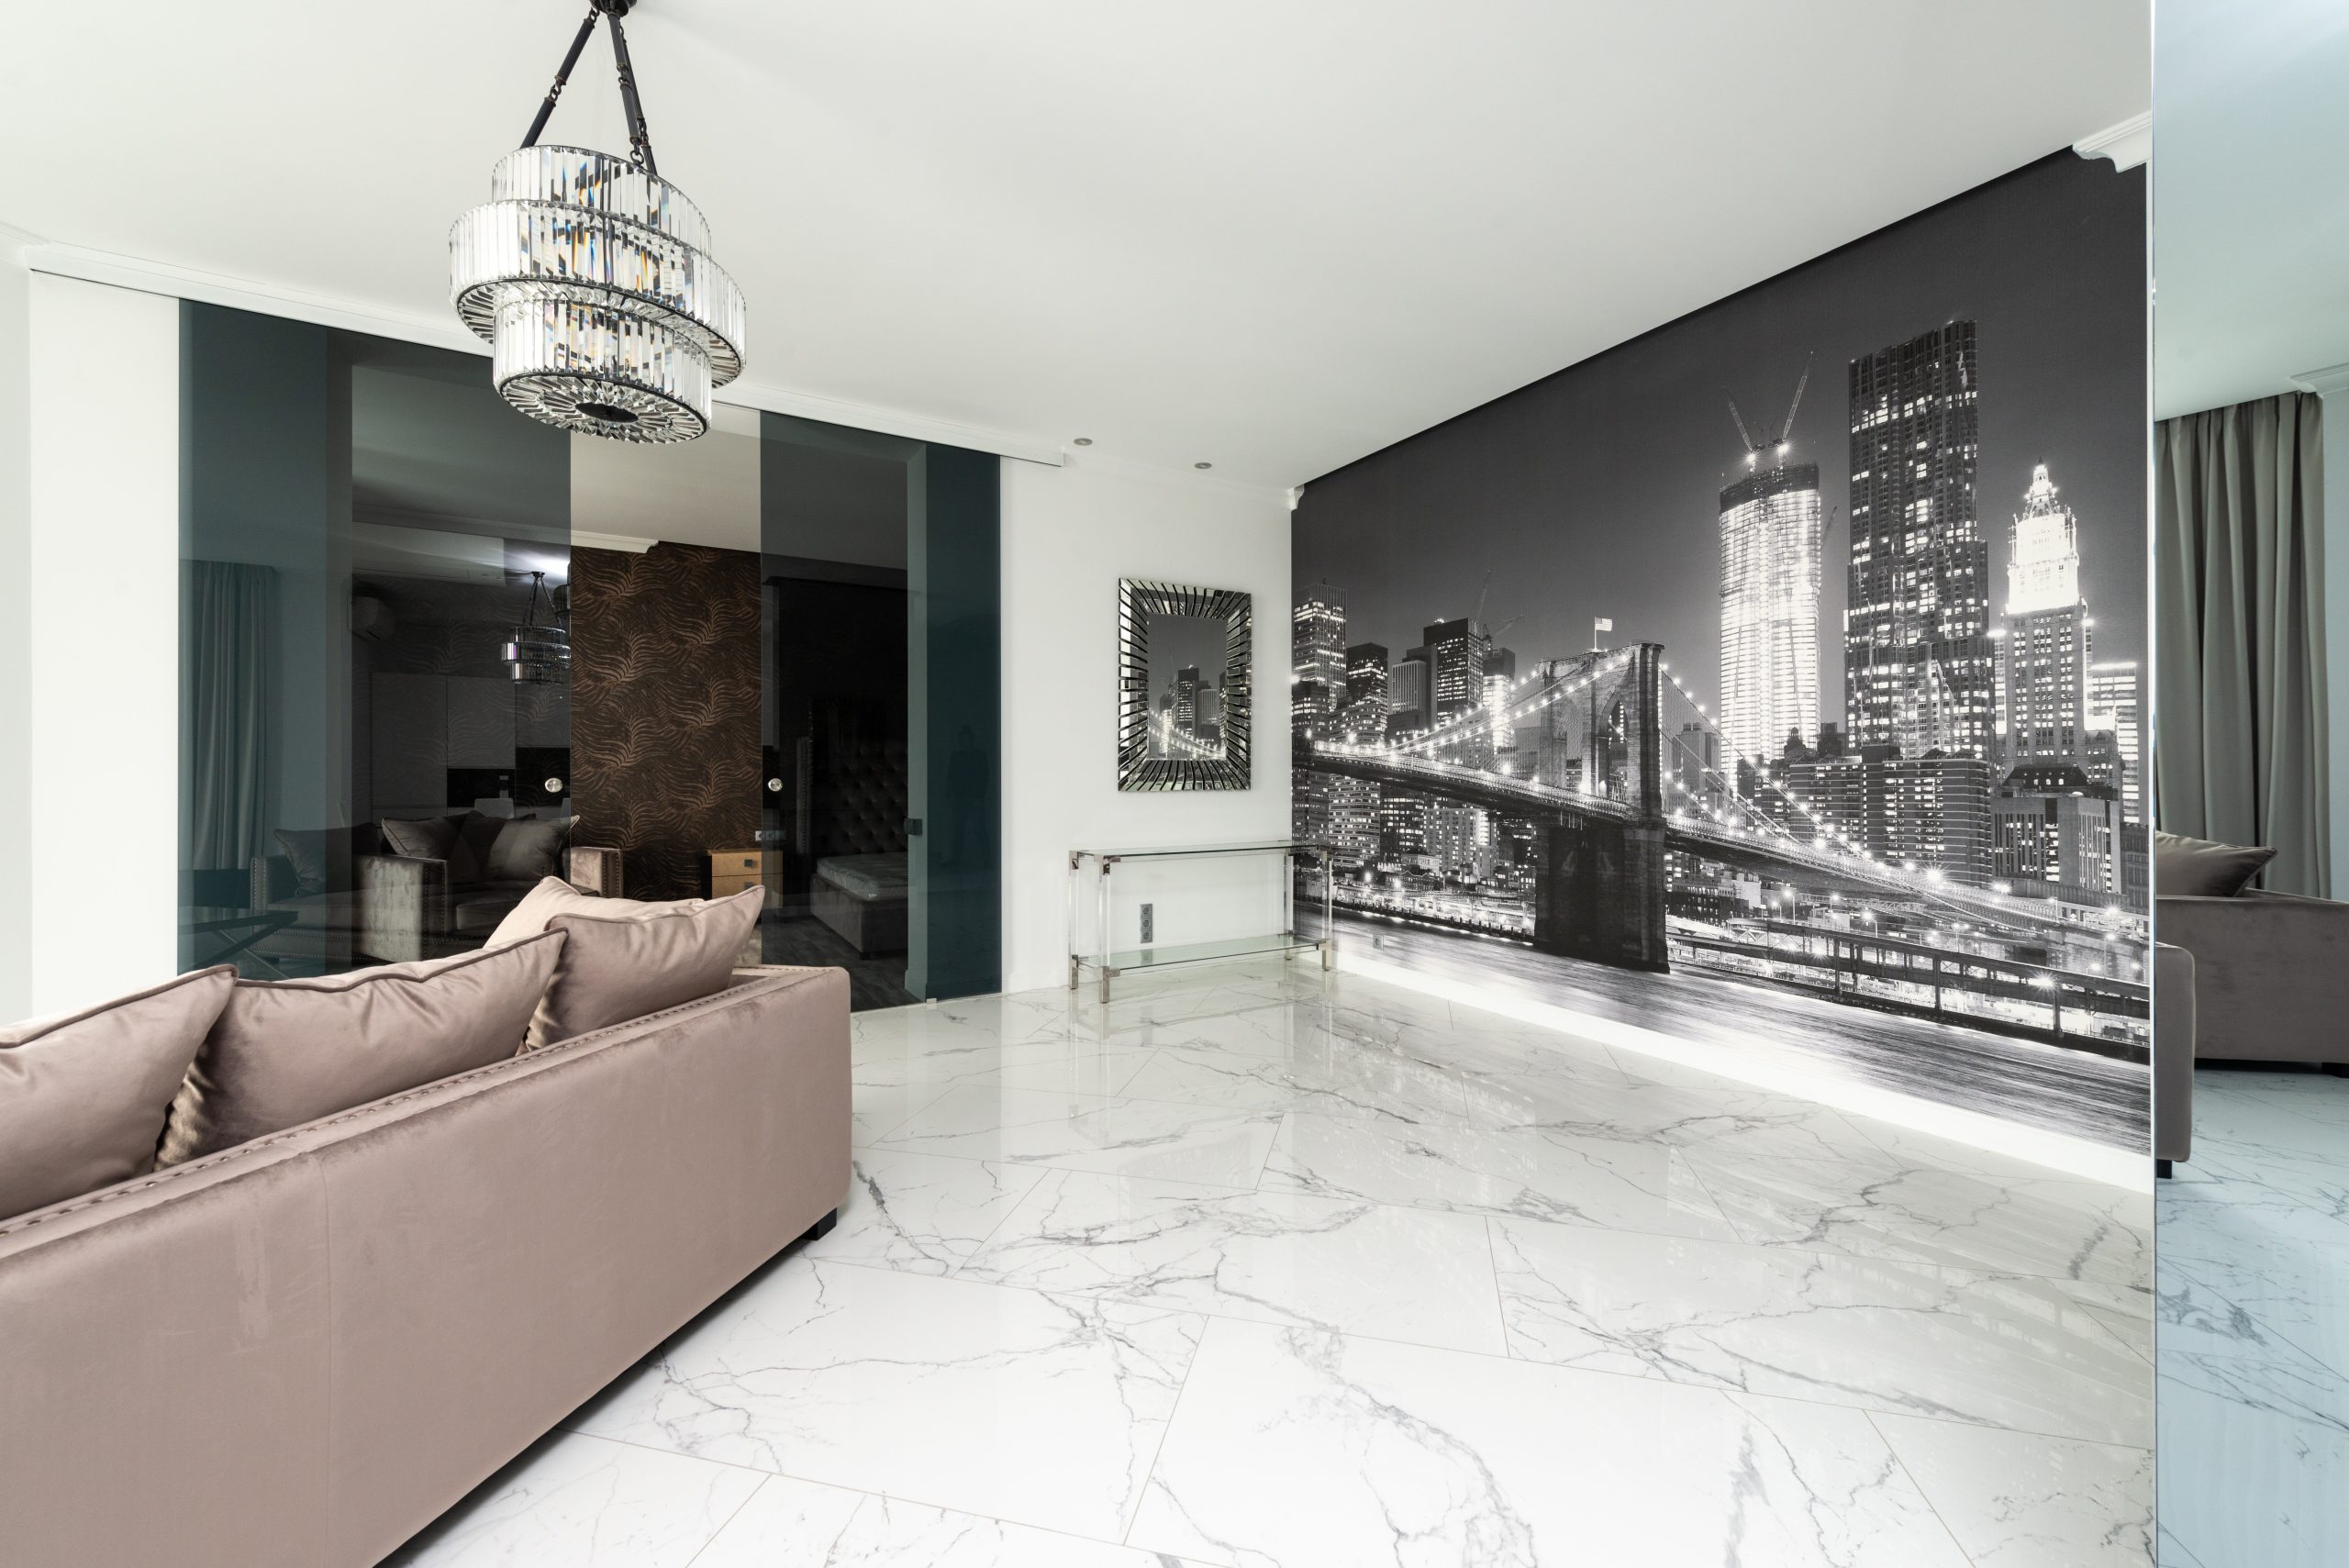 Wall Murals – A Great Way to Decorate an Empty Wall